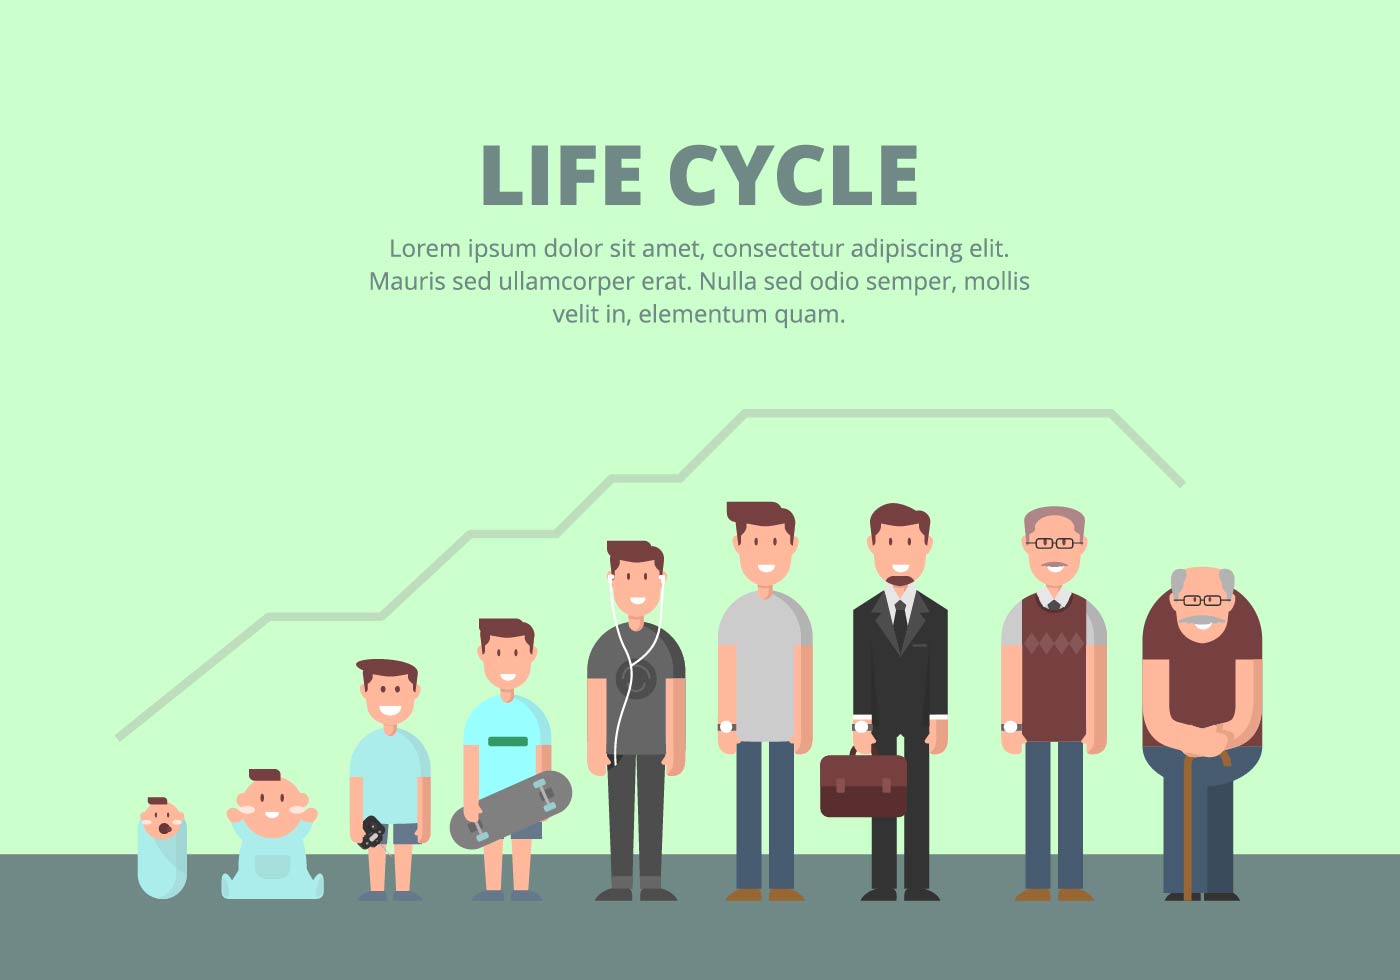 Human Life Cycle Free Vector Art - (44 Free Downloads)